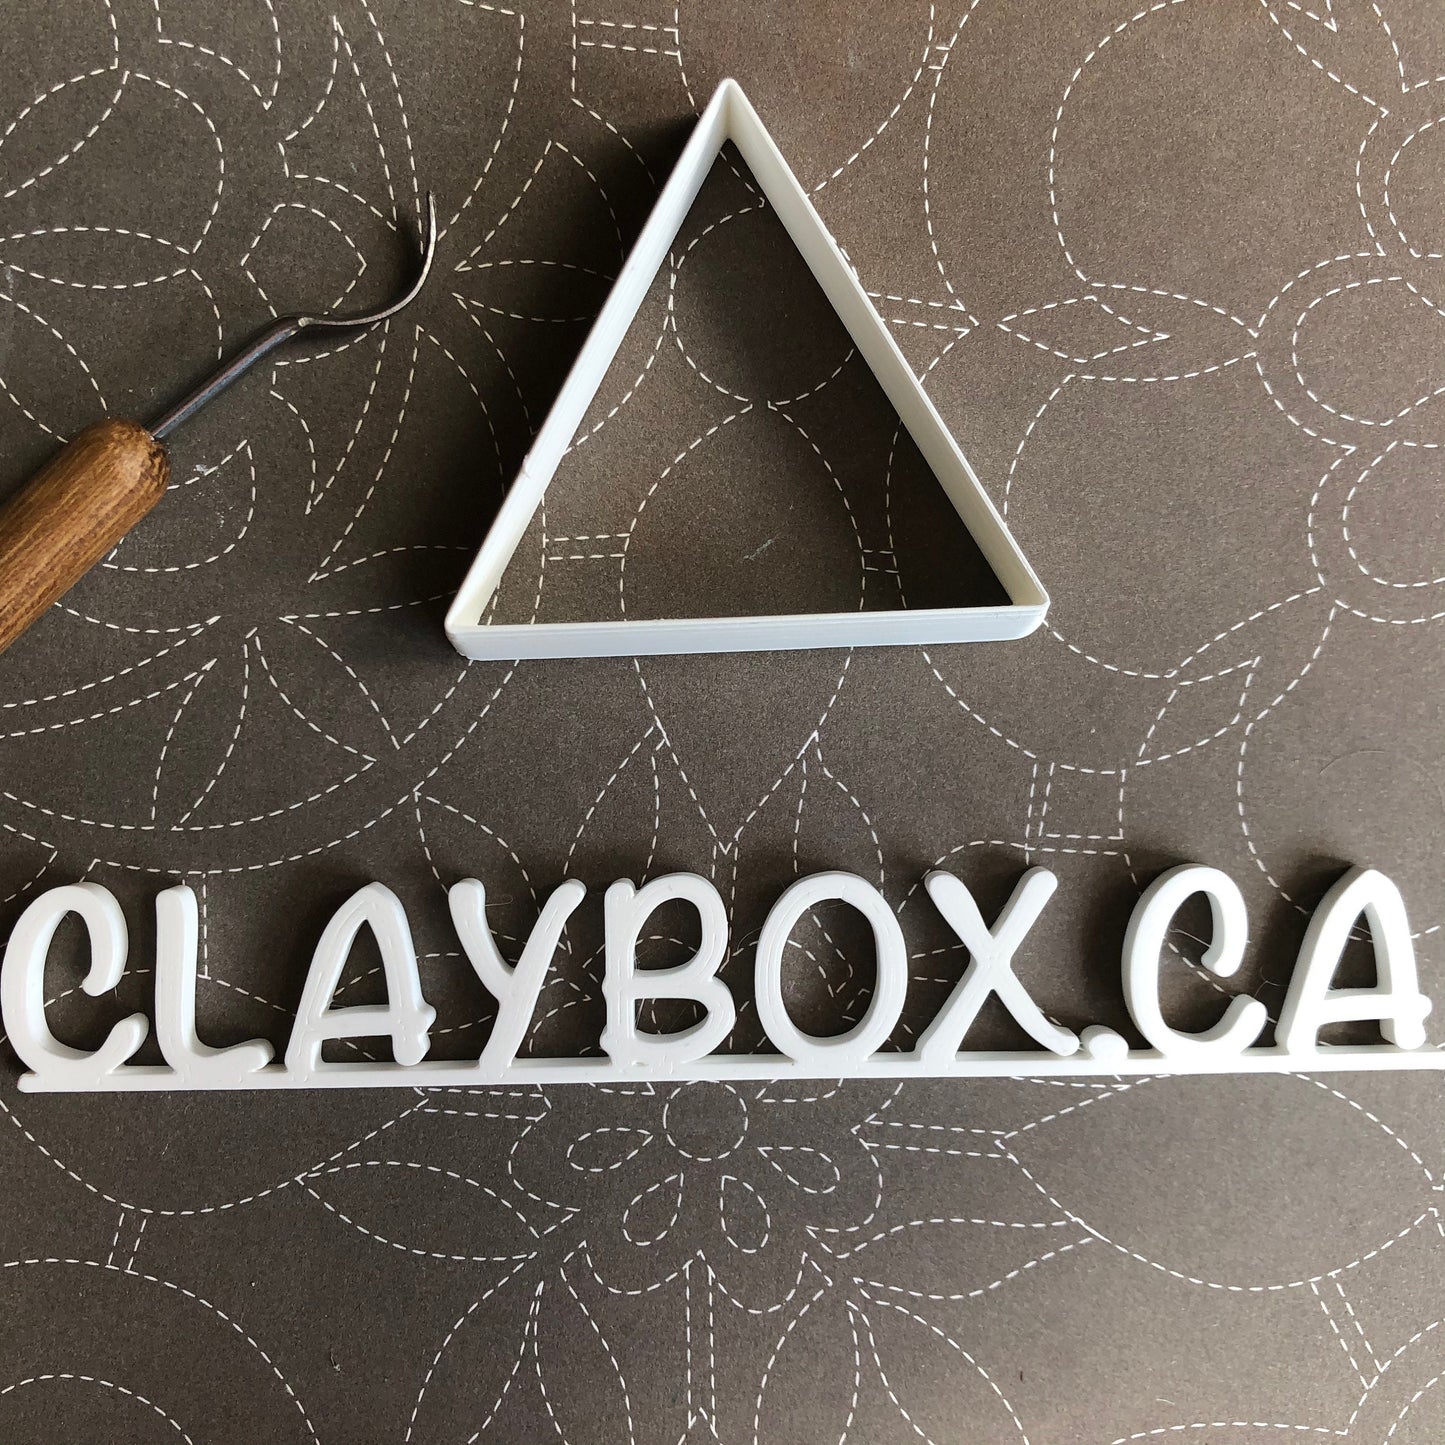 Equilateral triangle cutter set - made for use with polymer clay